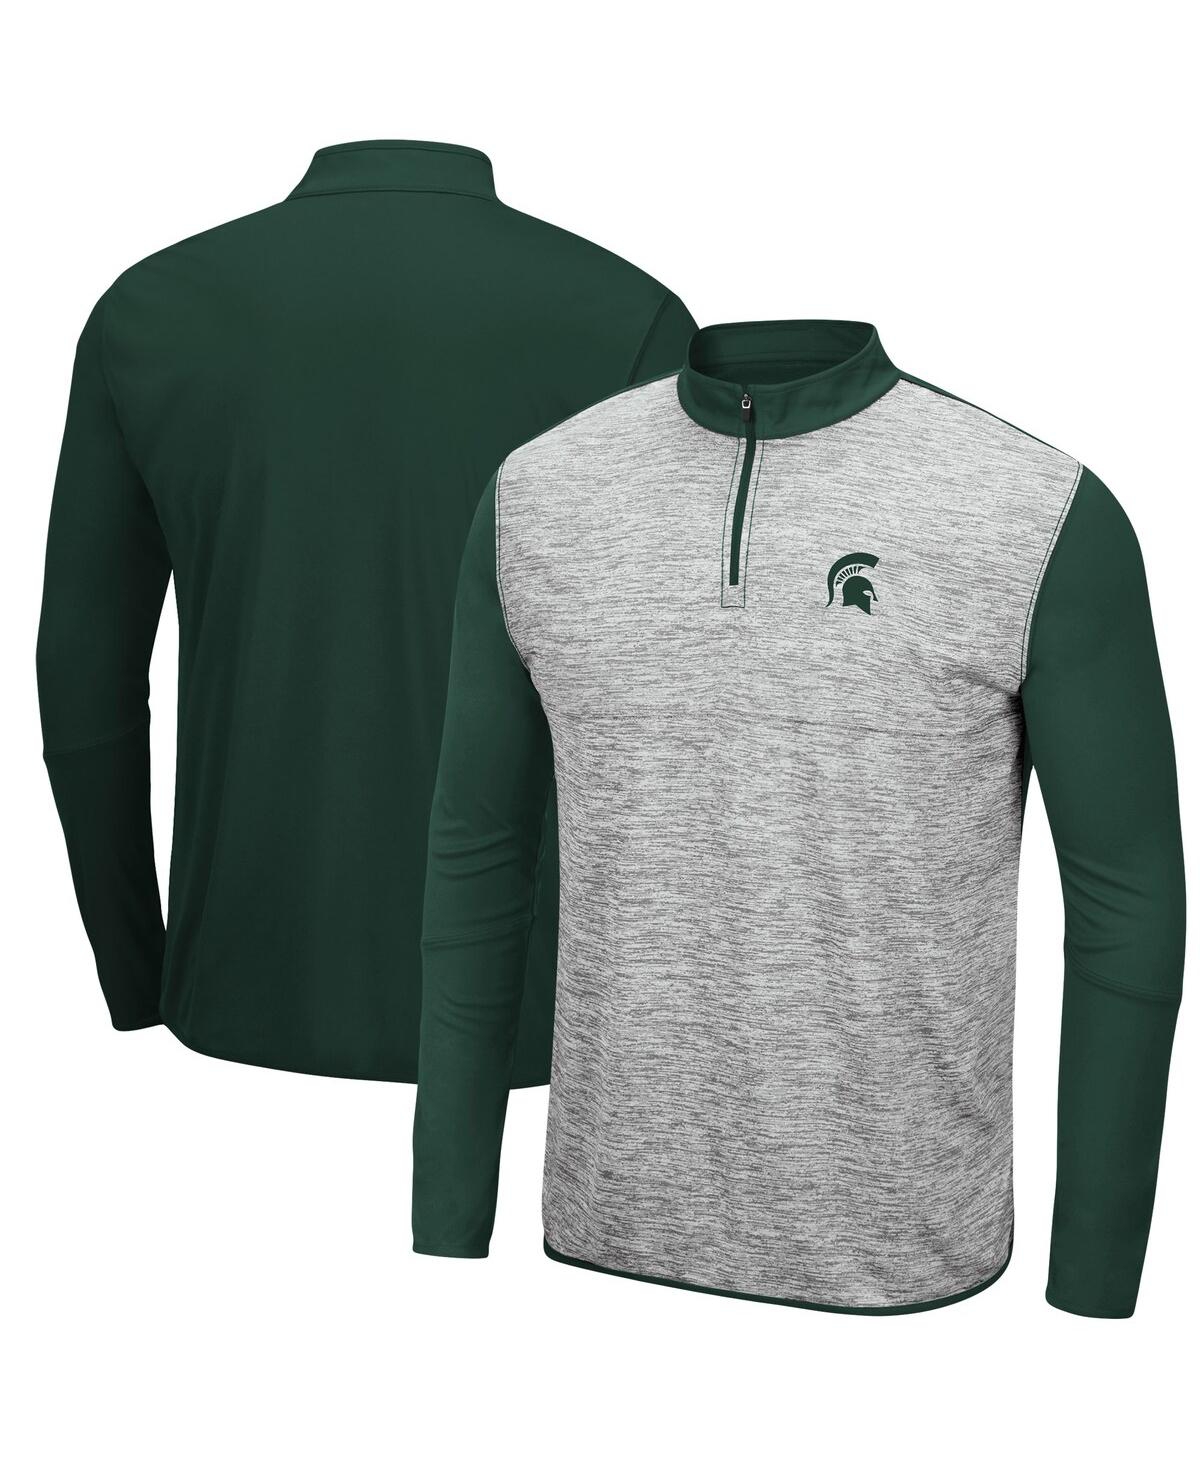 Men's Heathered Gray, Green Michigan State Spartans Prospect Quarter-Zip Jacket - Heathered Gray, Green